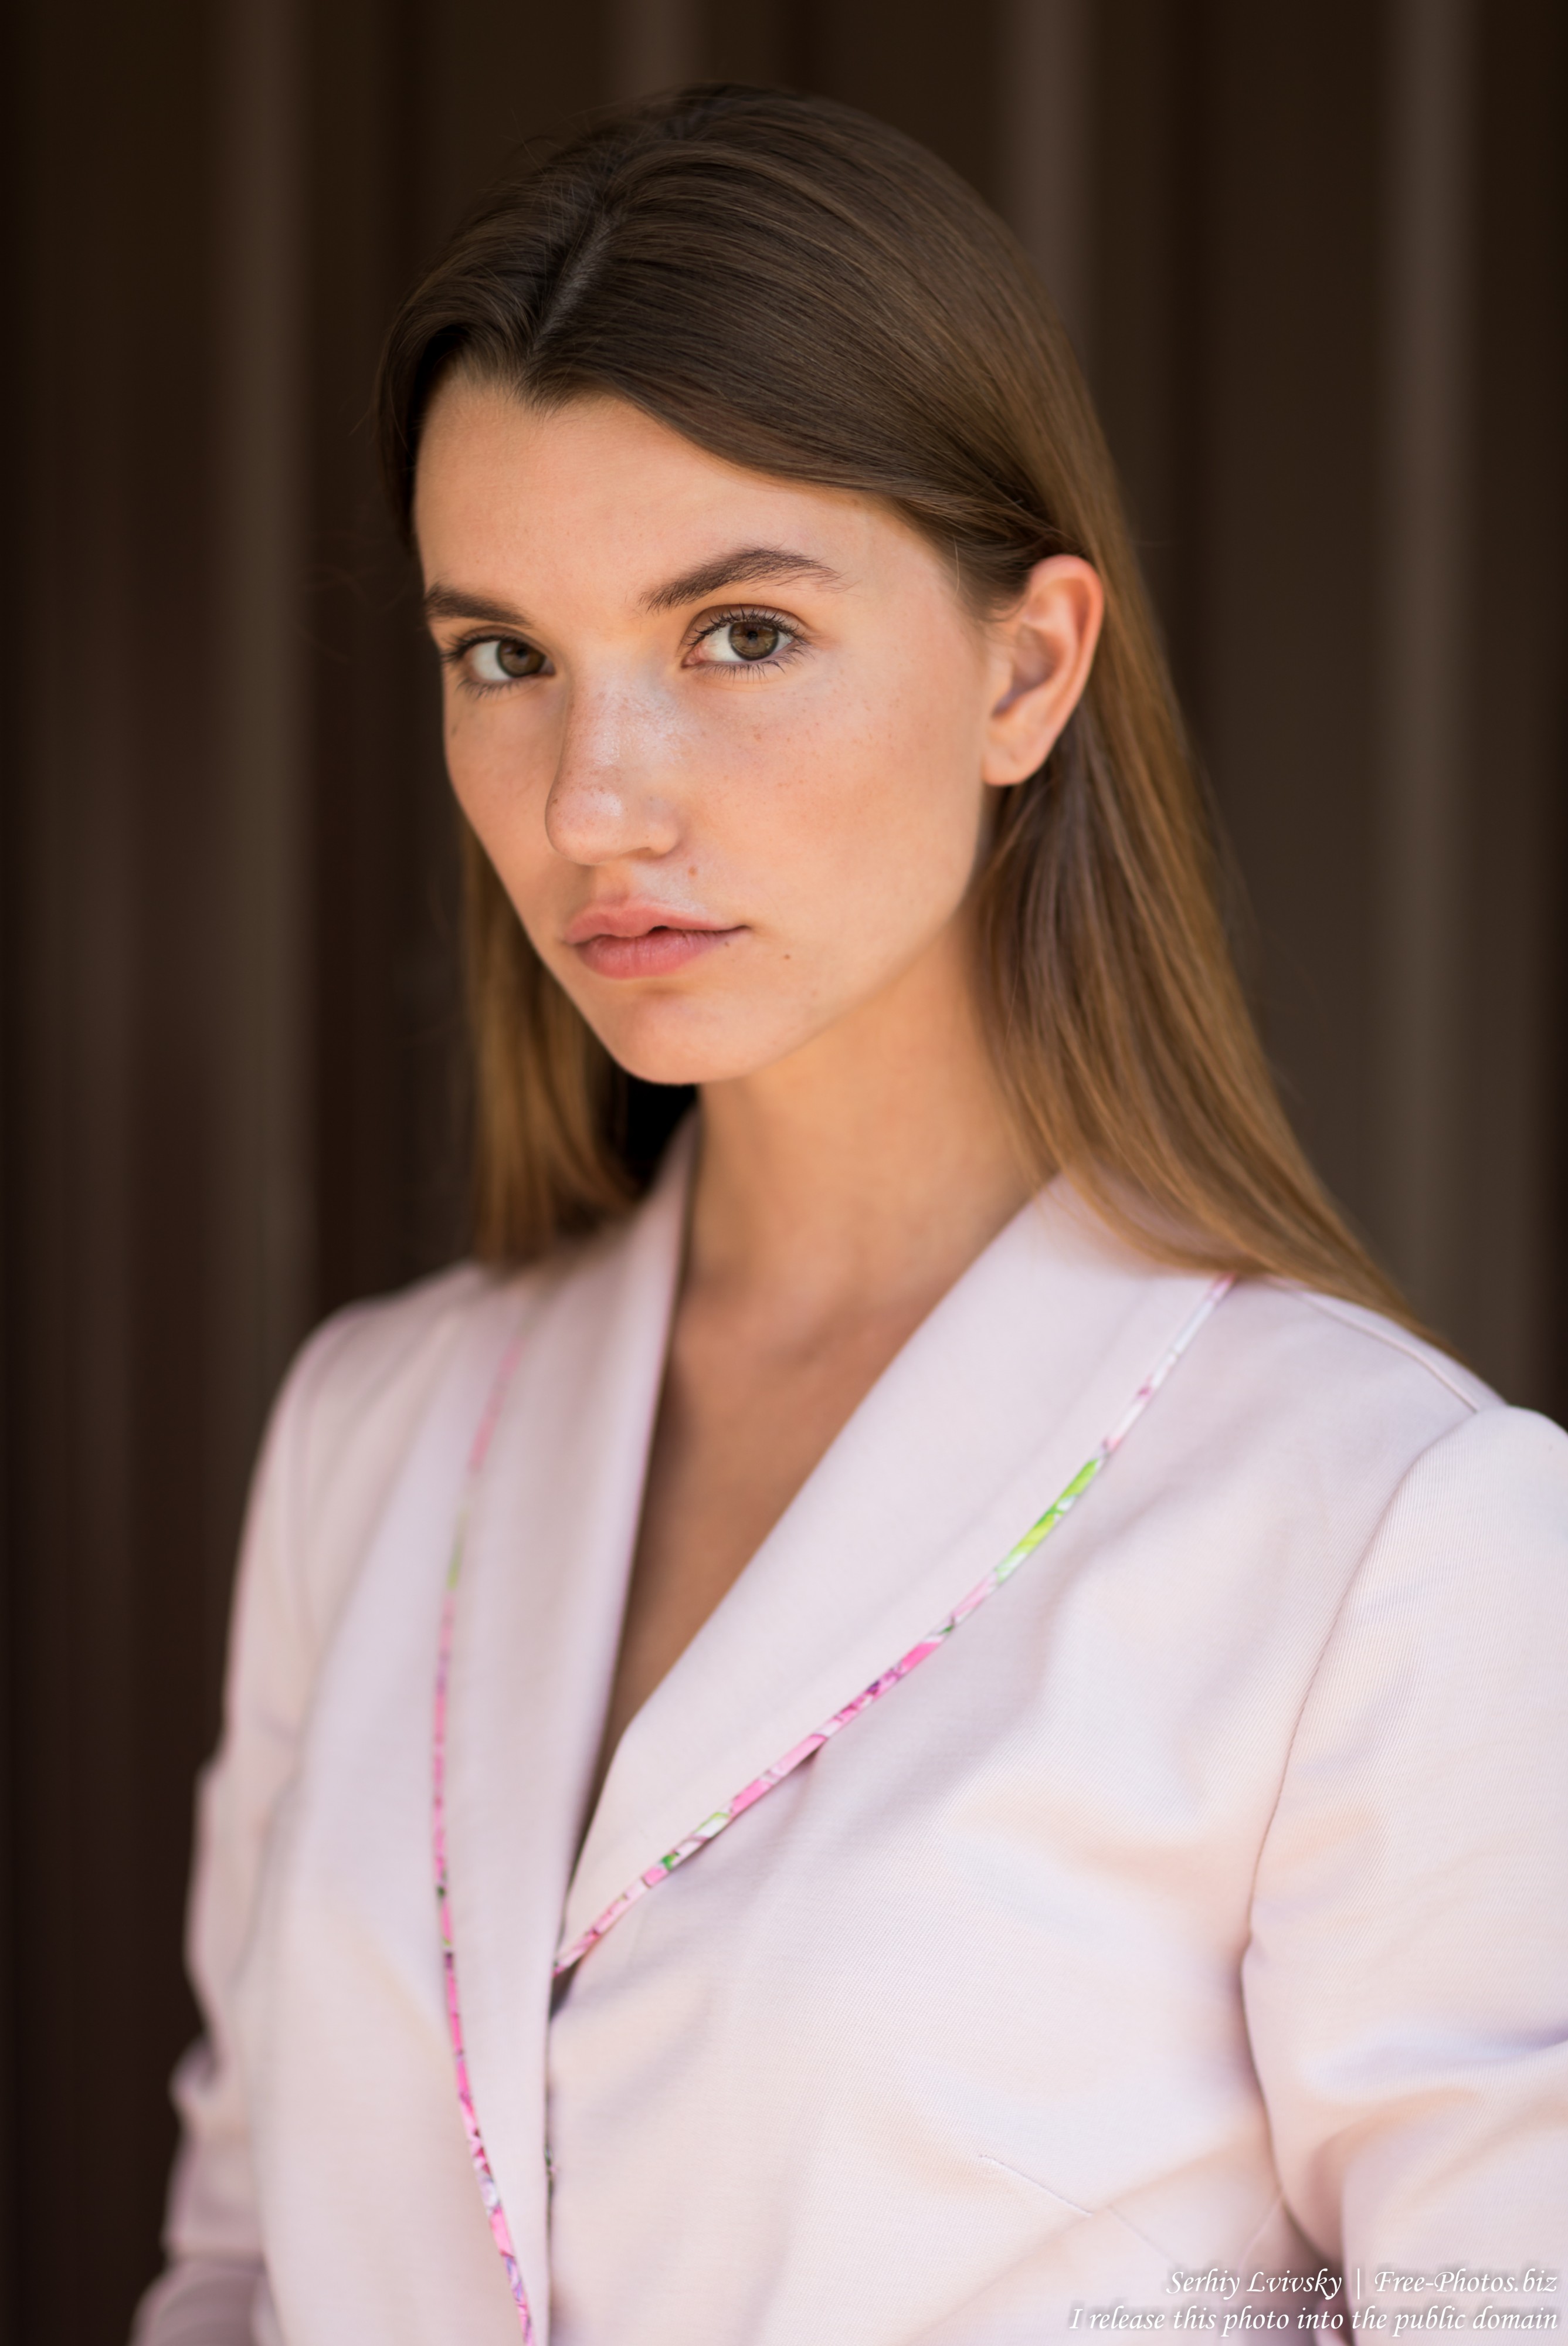 Sophia - a 21-year-old girl photographed in August 2019 by Serhiy Lvivsky, picture 19